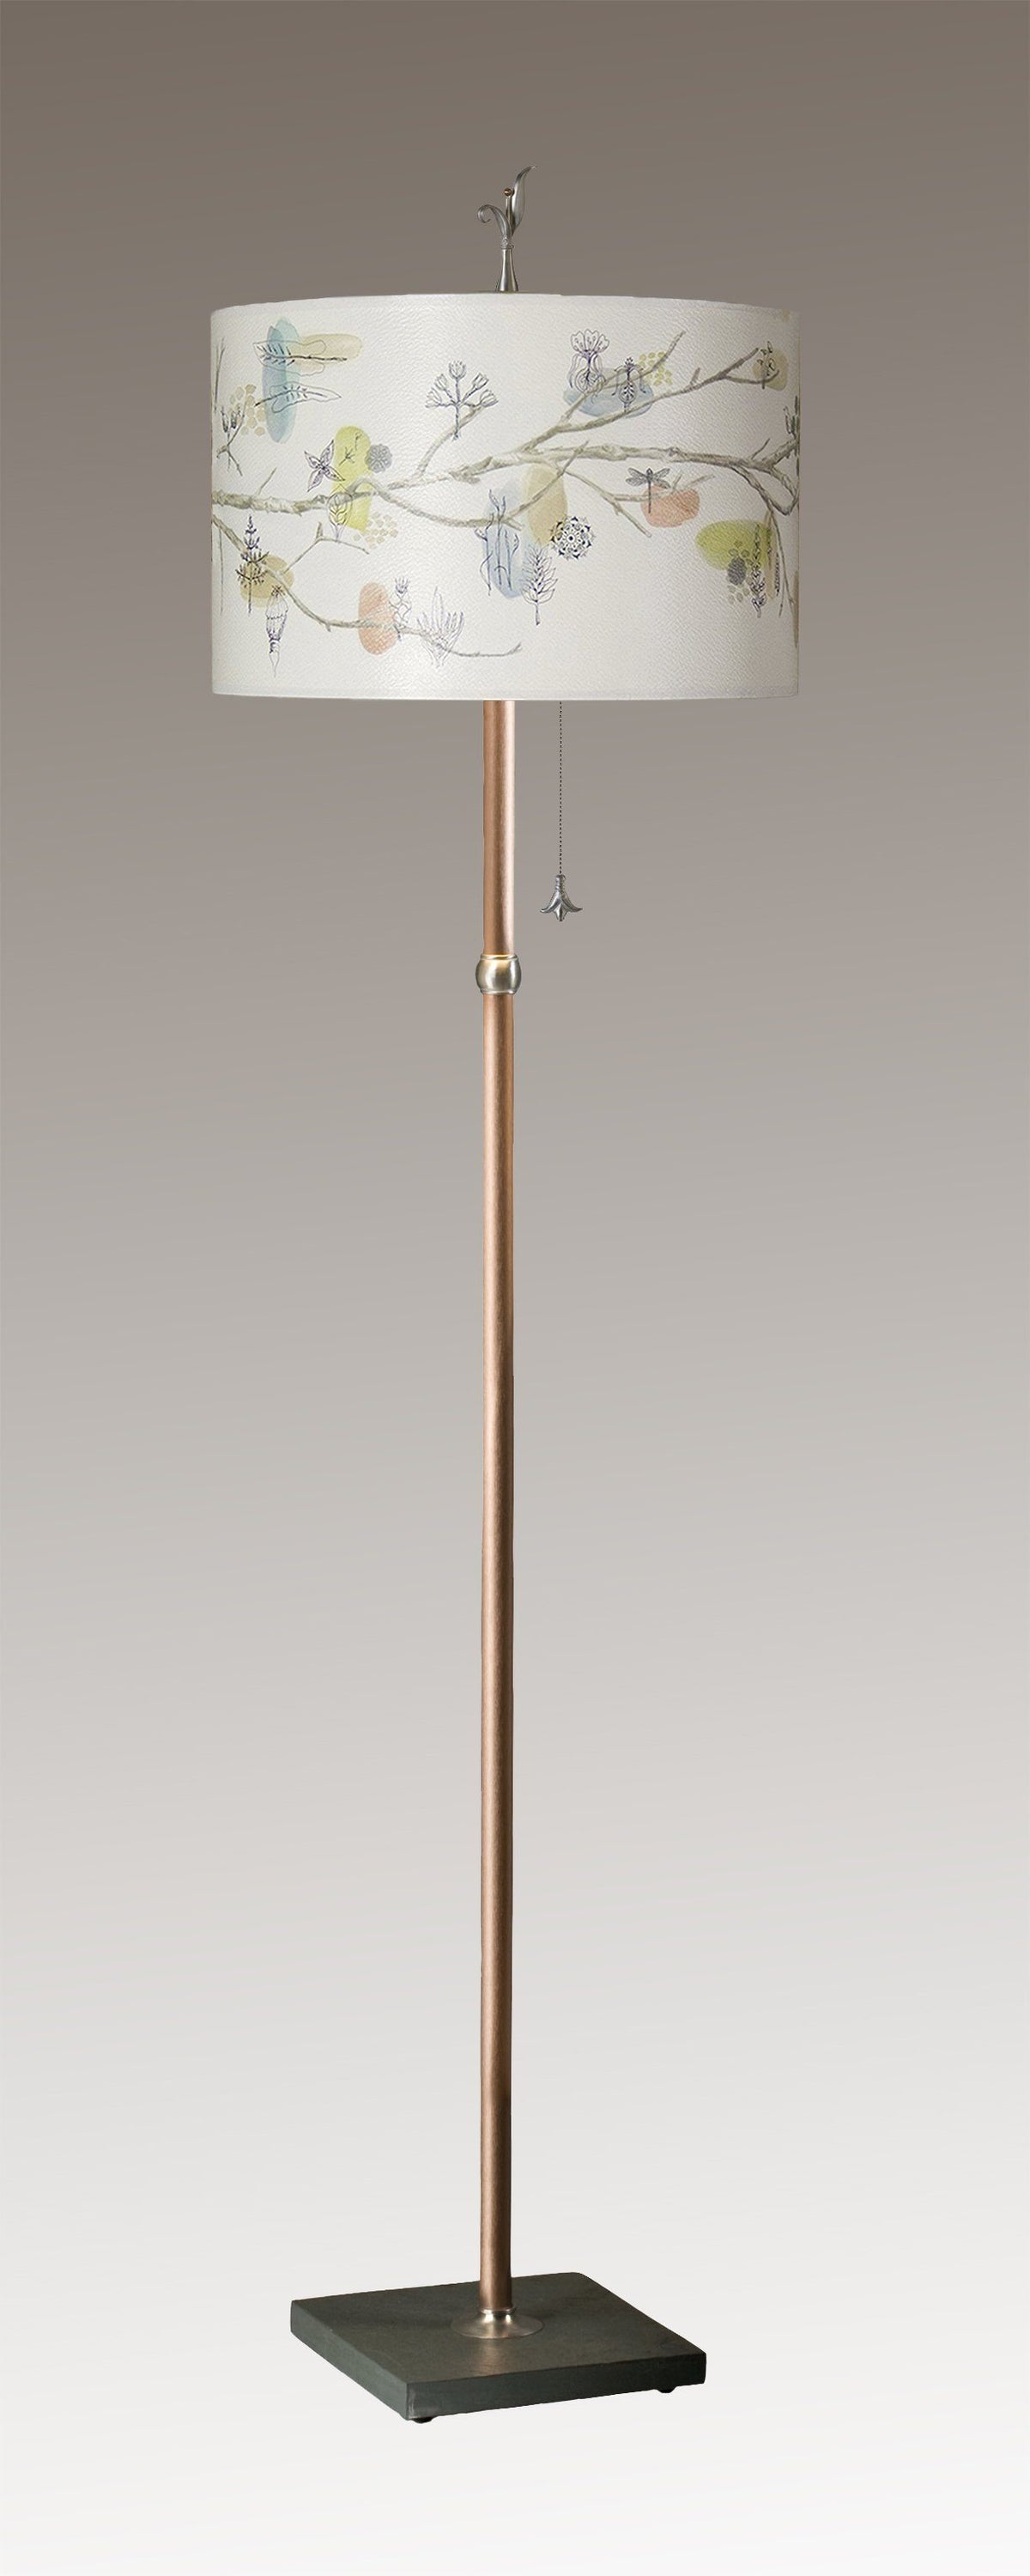 Janna Ugone &amp; Co Floor Lamps Copper Floor Lamp with Large Drum Shade in Artful Branch